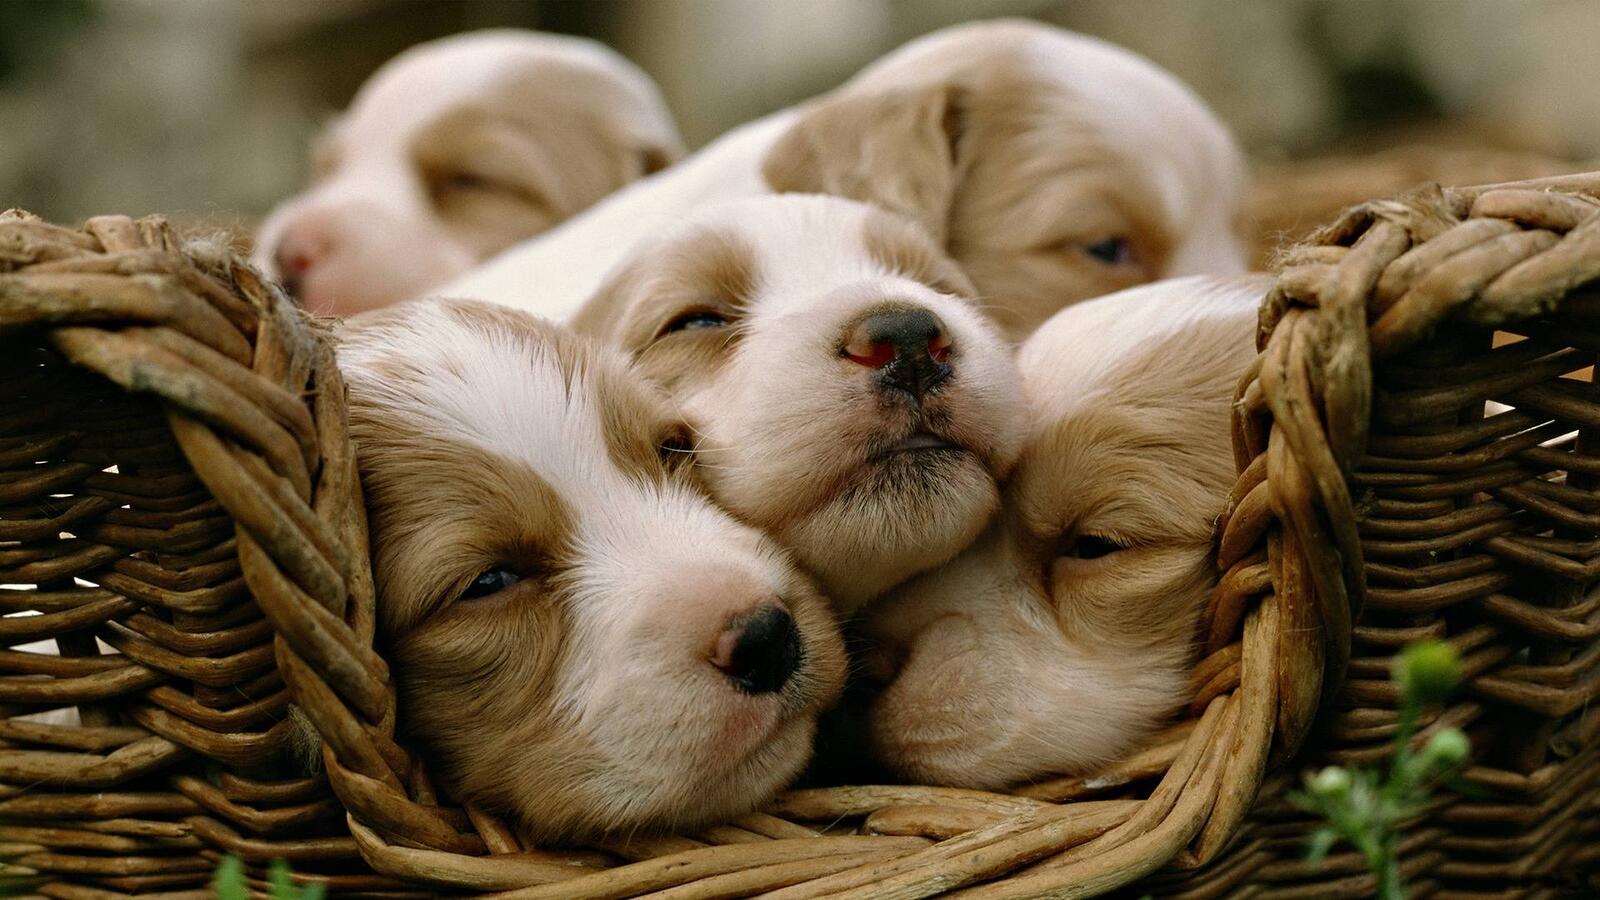 Wallpapers puppies in a basket small crumbs eyes on the desktop